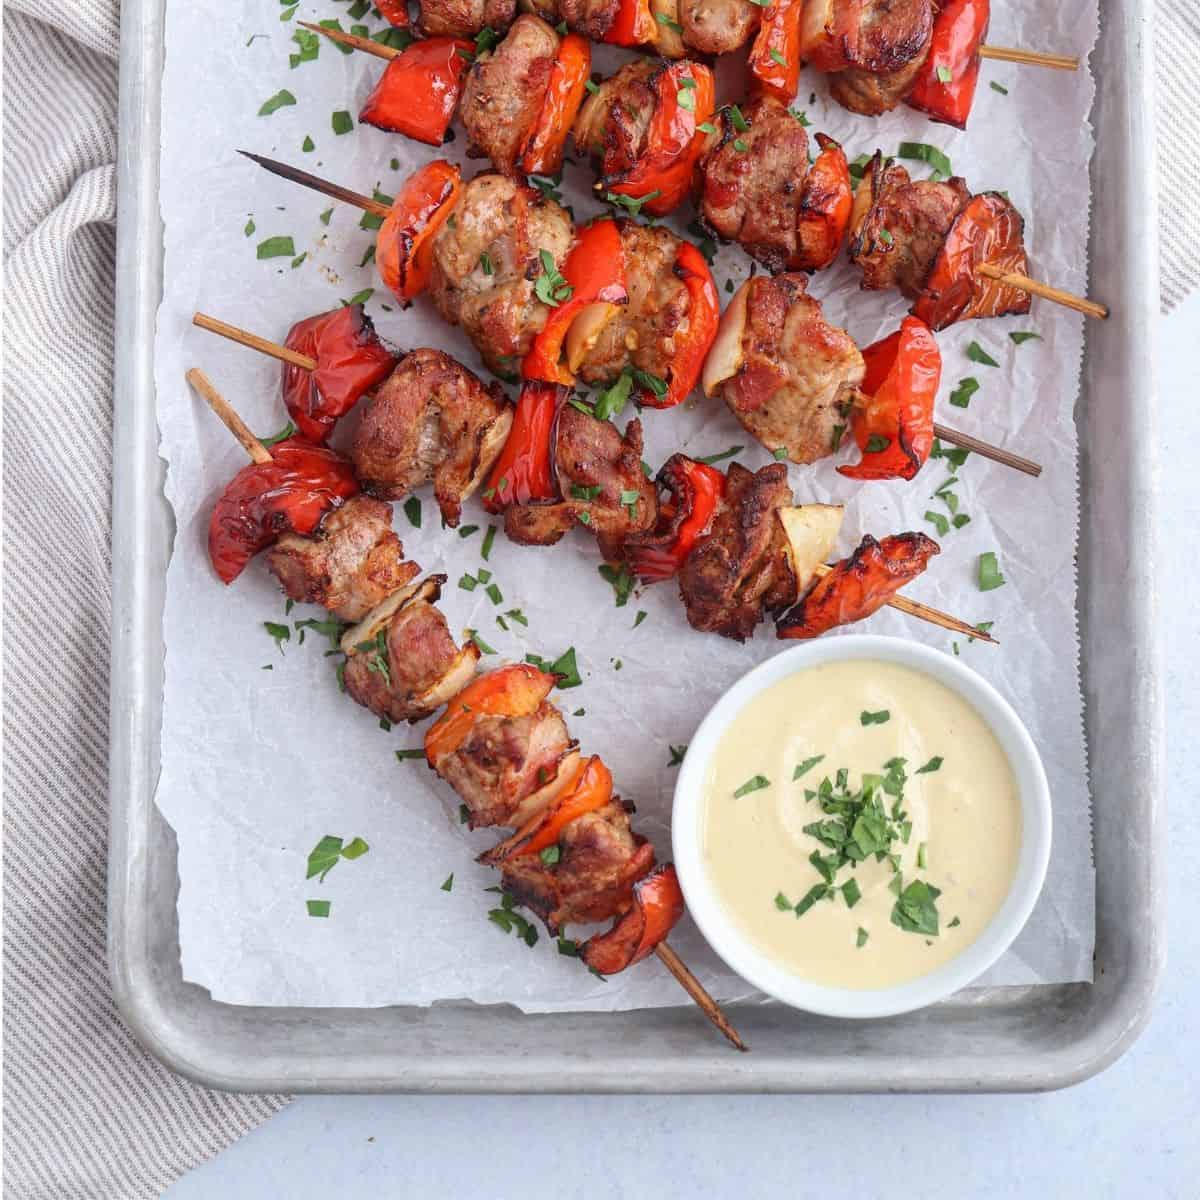 pork kebabs made with peppers, onions and bacon on a baking sheet lined with paper with a side of mustard dipping sauce.